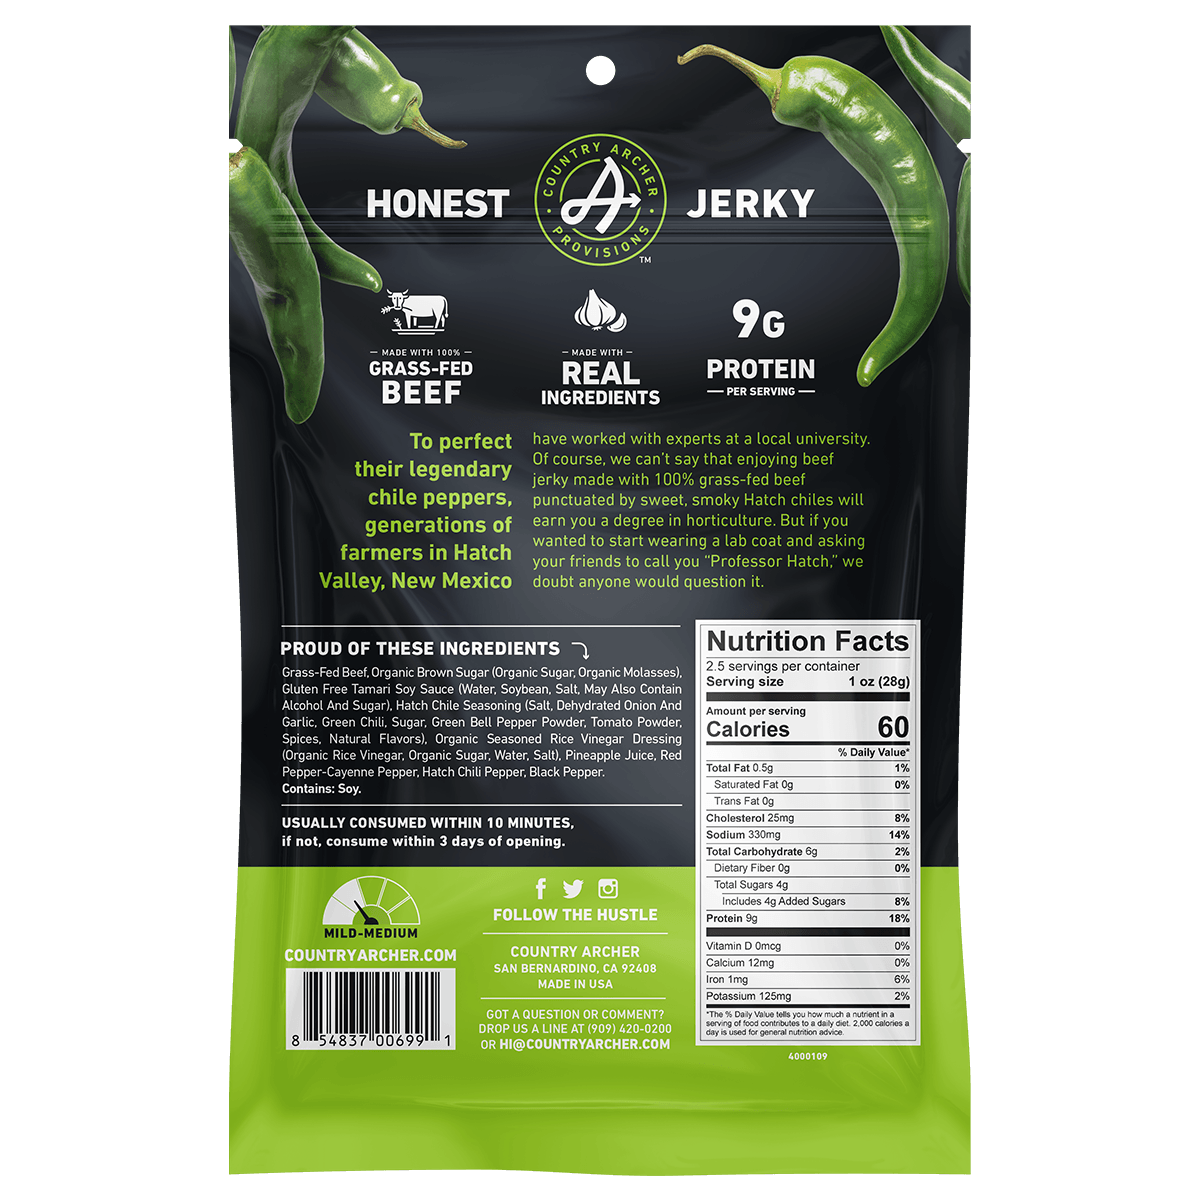  Hatch Chile Beef Jerky by Country Archer, Hatch Chile Beef Jerky, Beef - Gluten-F, hatch-chile-beef-jerky, , 2.5oz Bag